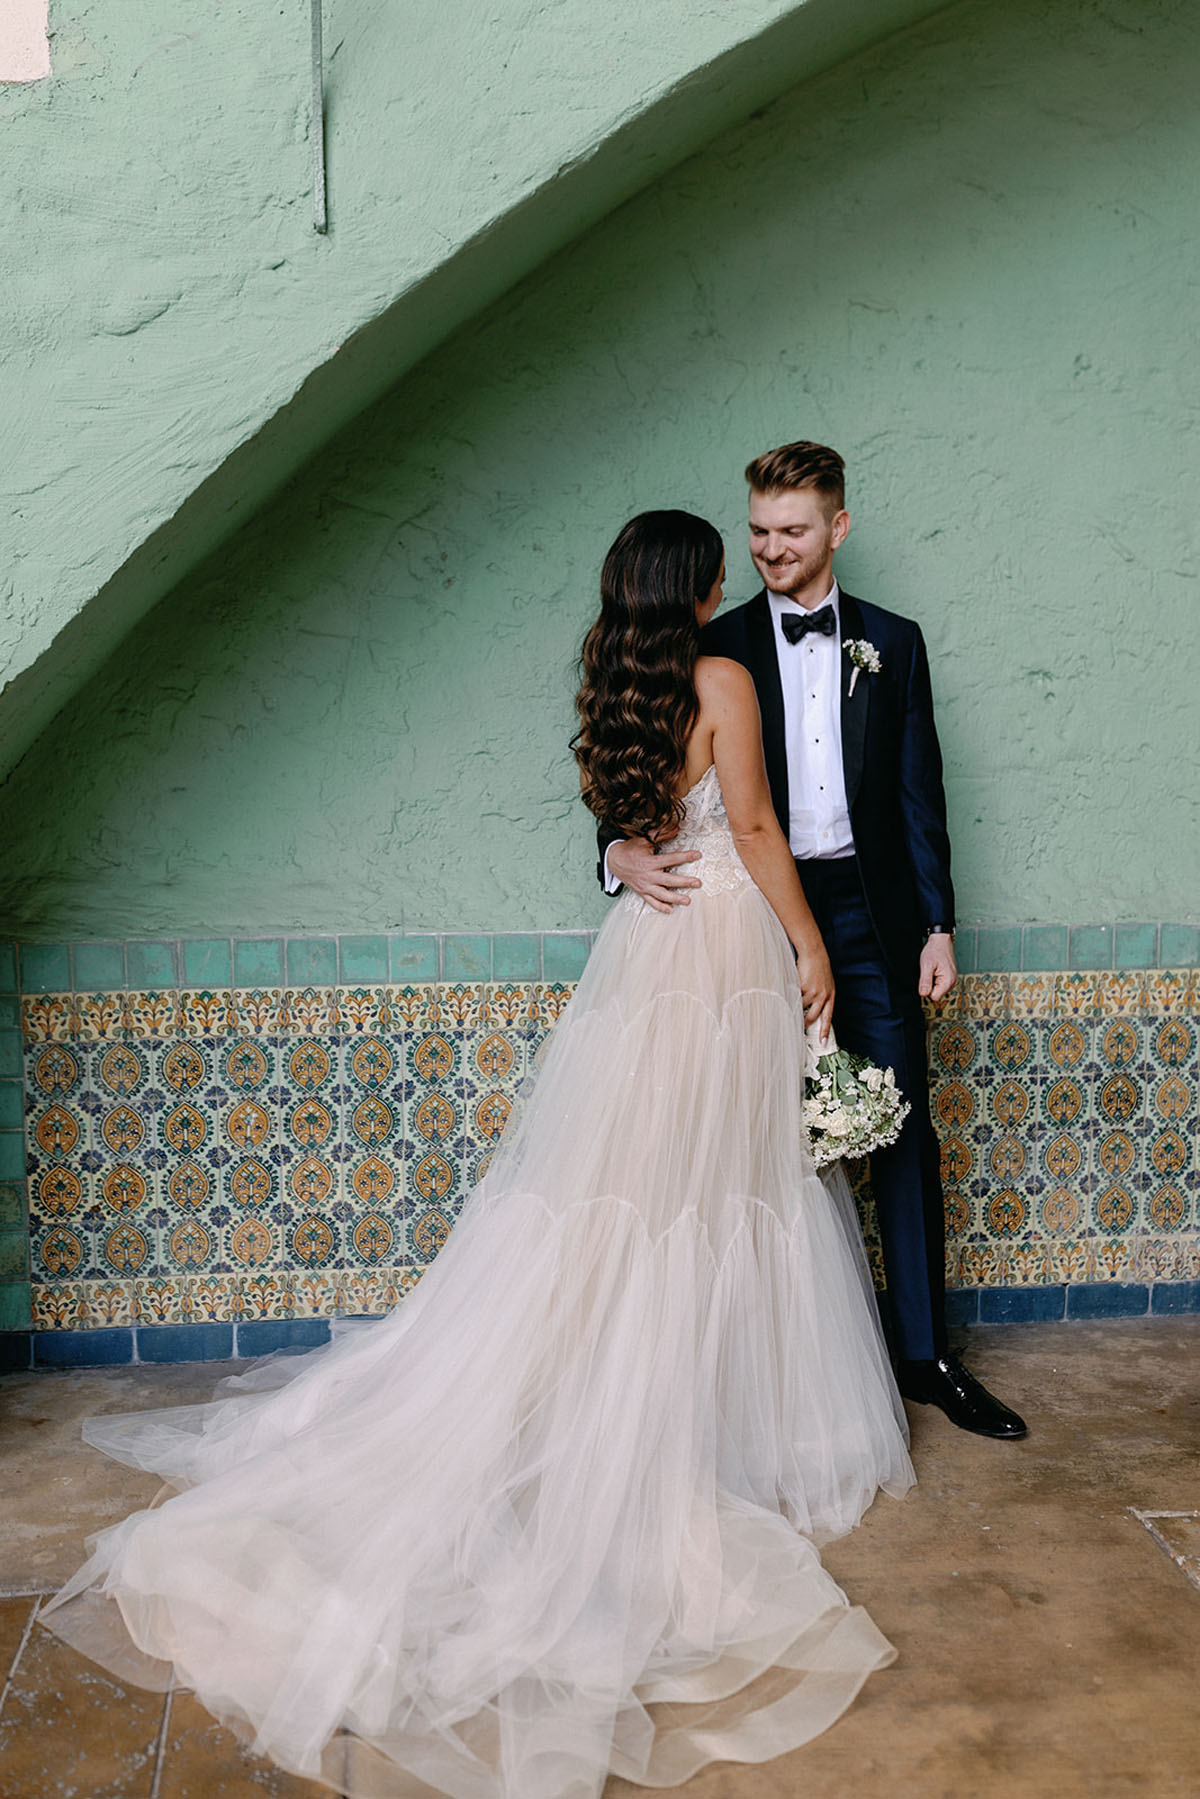 A breathtaking Florida wedding inspired by Italy and the Amalfi Coast